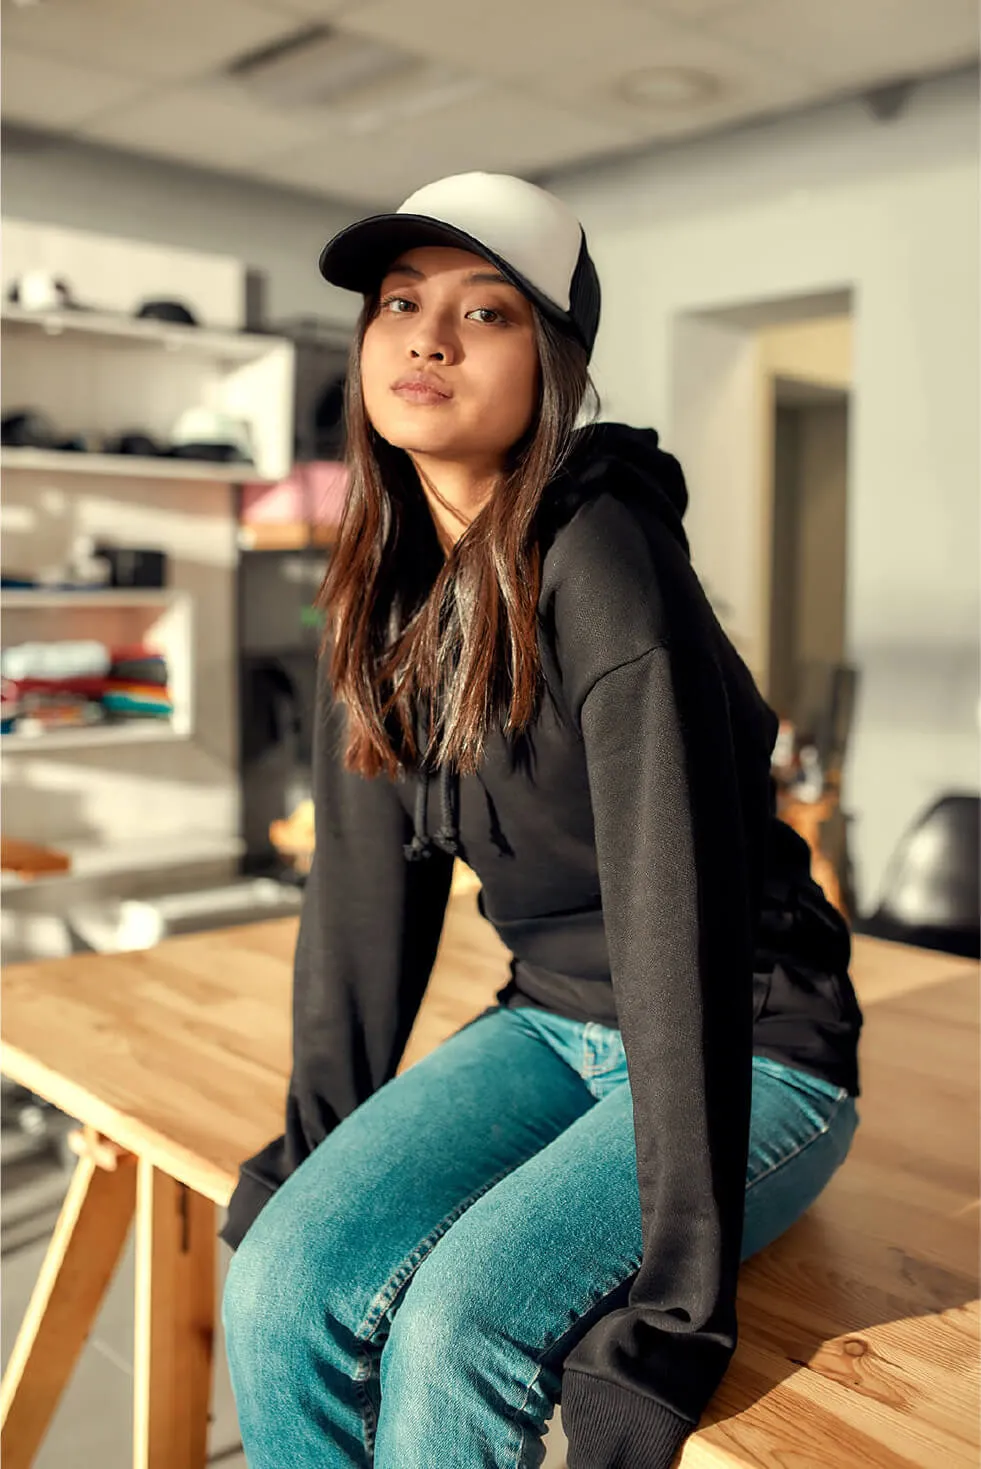 Woman sitting on a wooden table wearing a baseball cap and hoodie.